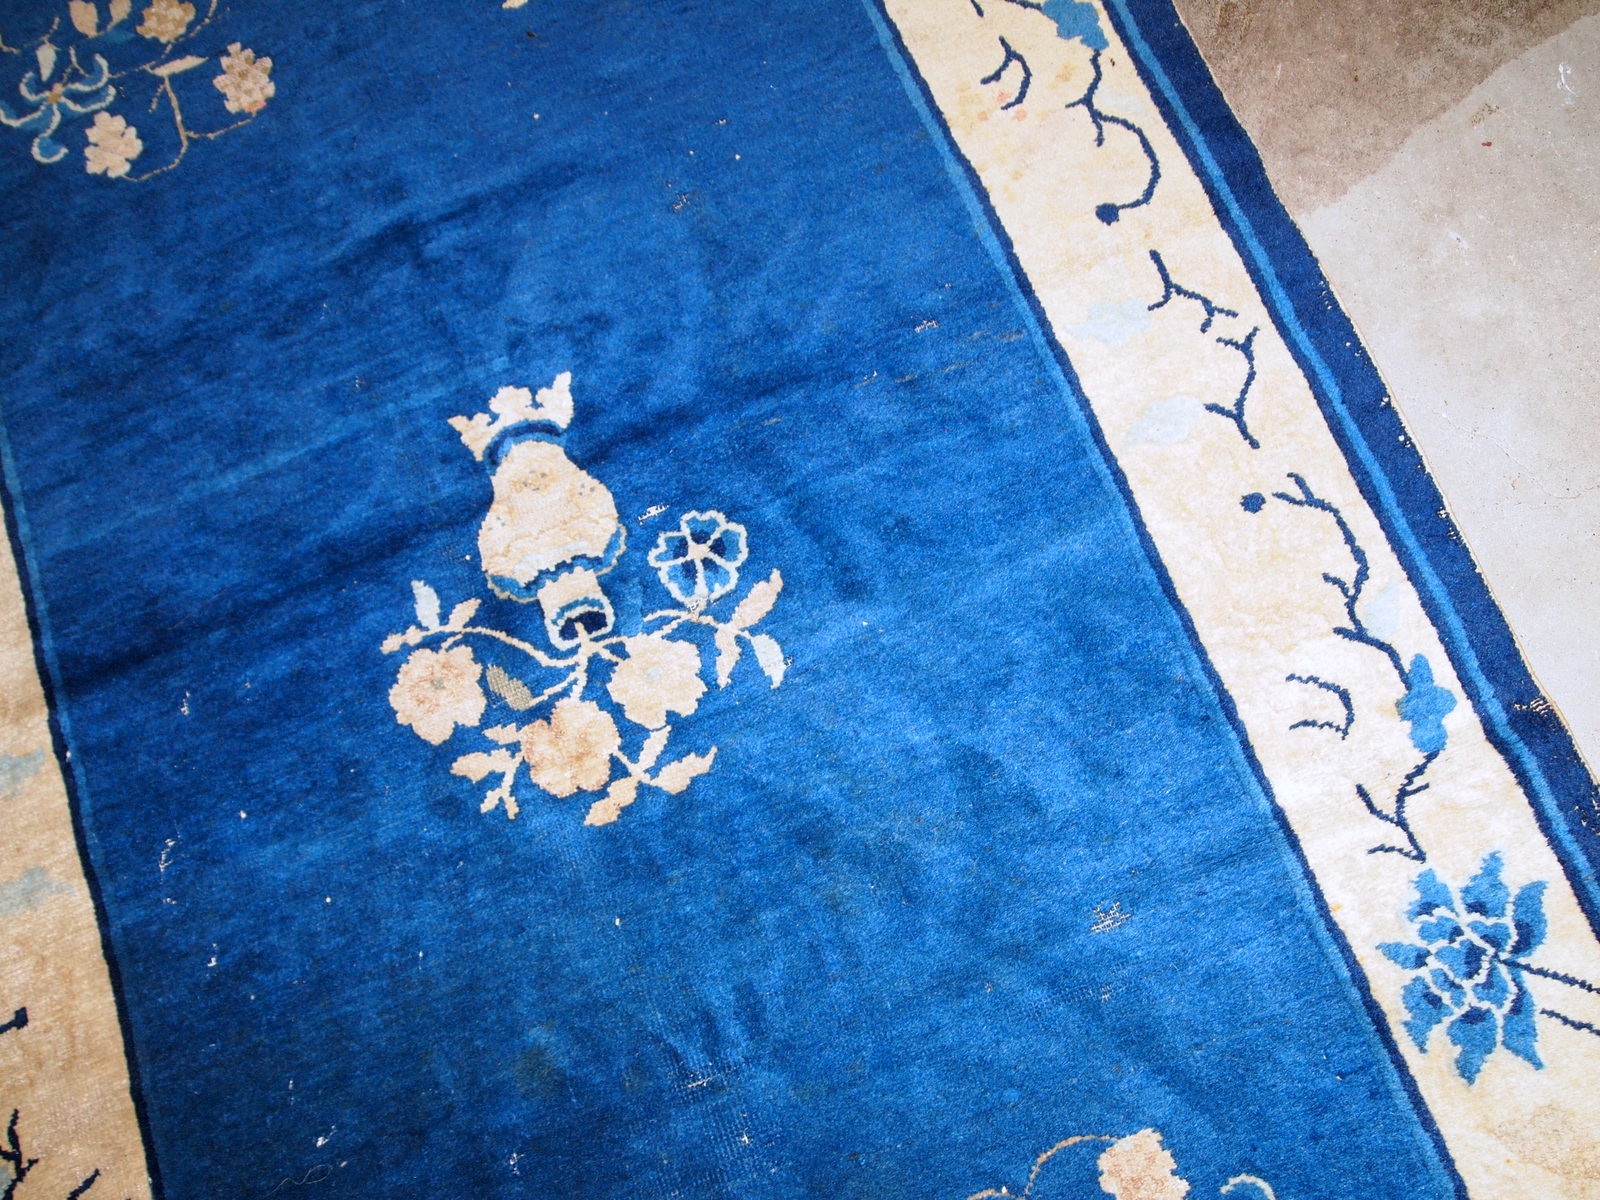 Handmade antique rug from Beijing, China, made in blue wool. The rug is in original condition, has some age wear. It is from the 1900s.